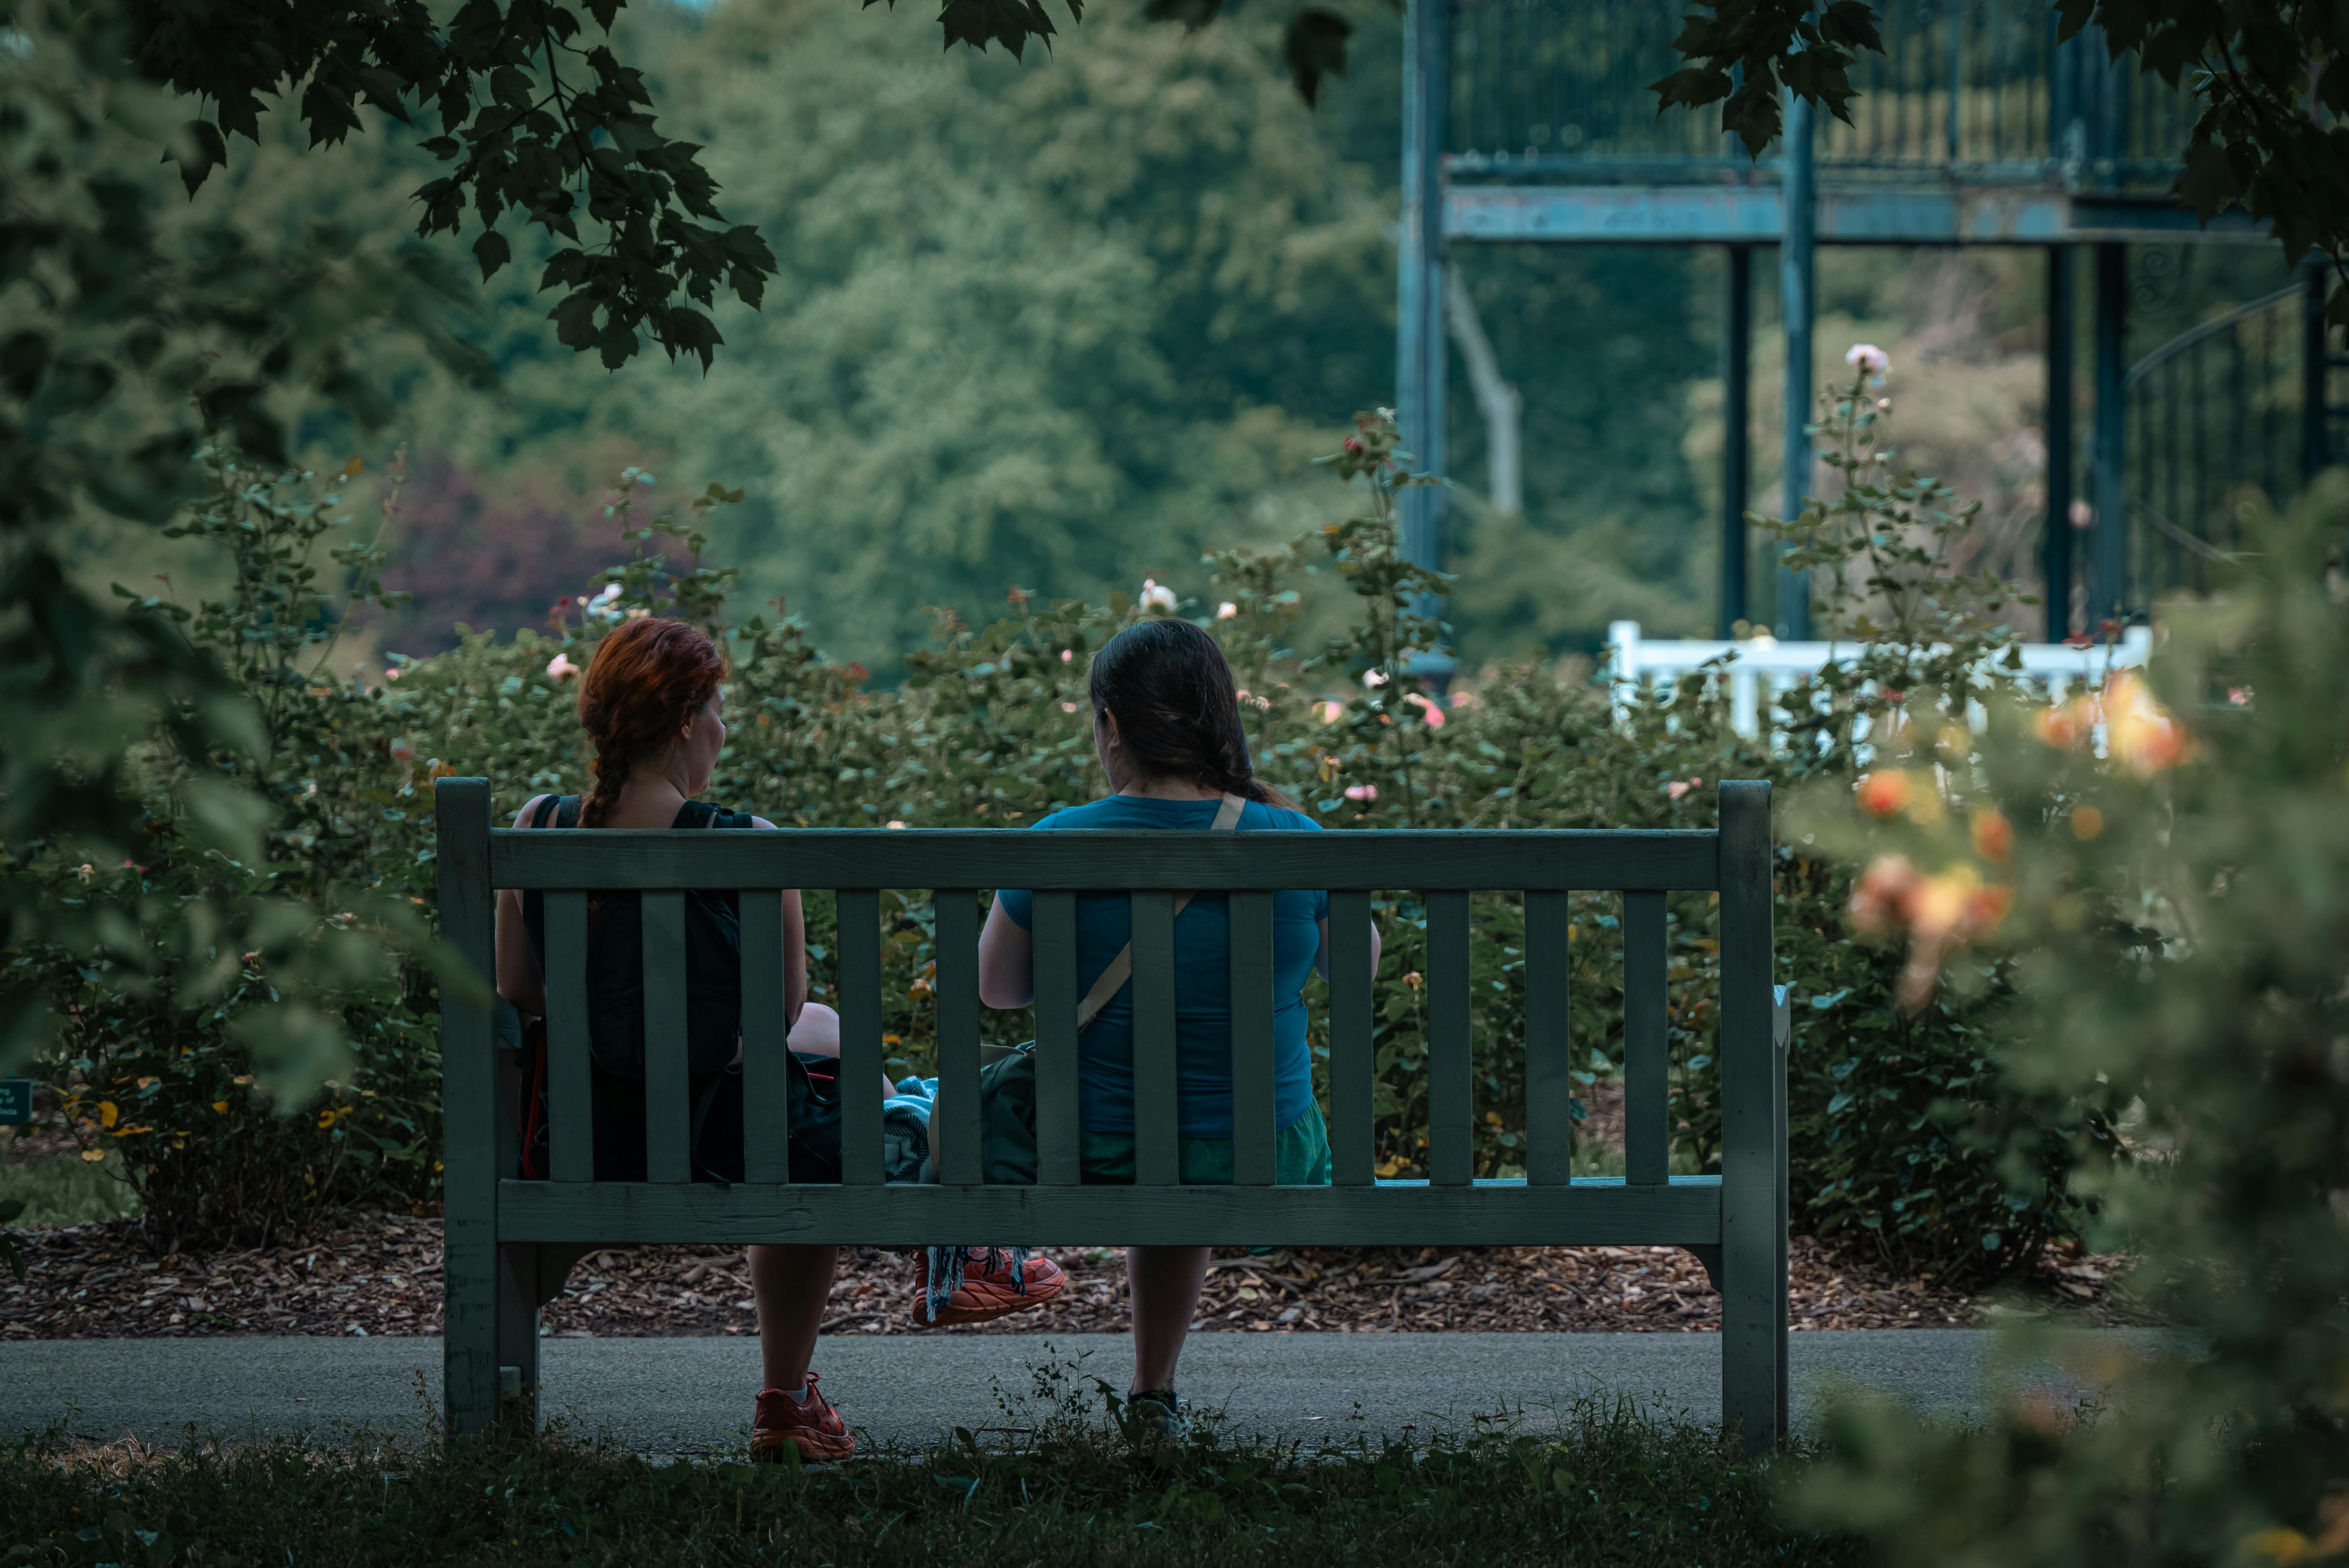 Girl sitting on wooden bench outside in a green park looking at